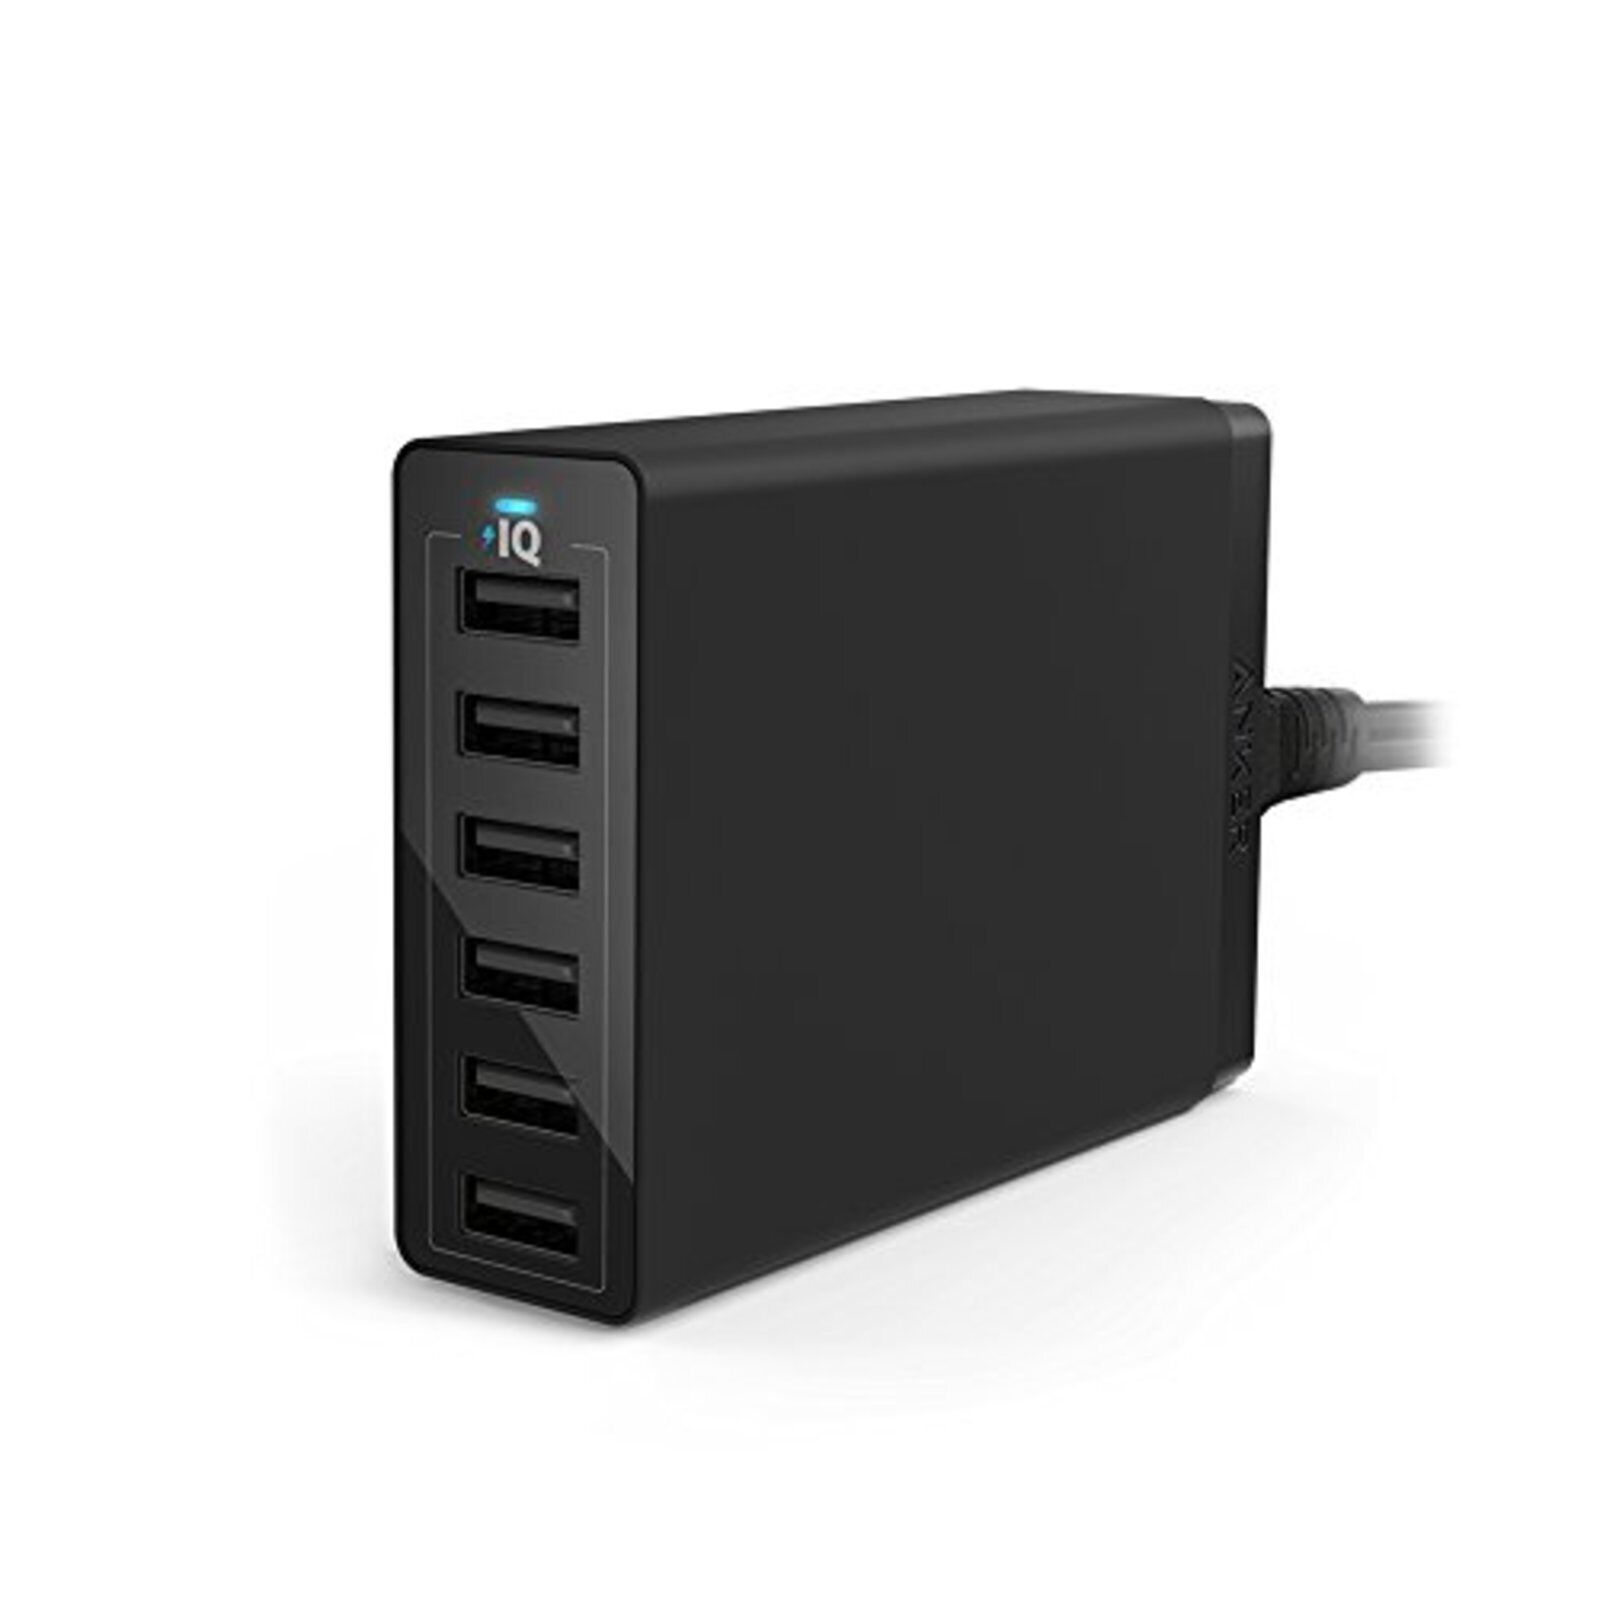 Anker PowerPort 6 60W 6-Port USB Wall Charger for iPhone 7,Galaxy S7,LG,HTC F/S